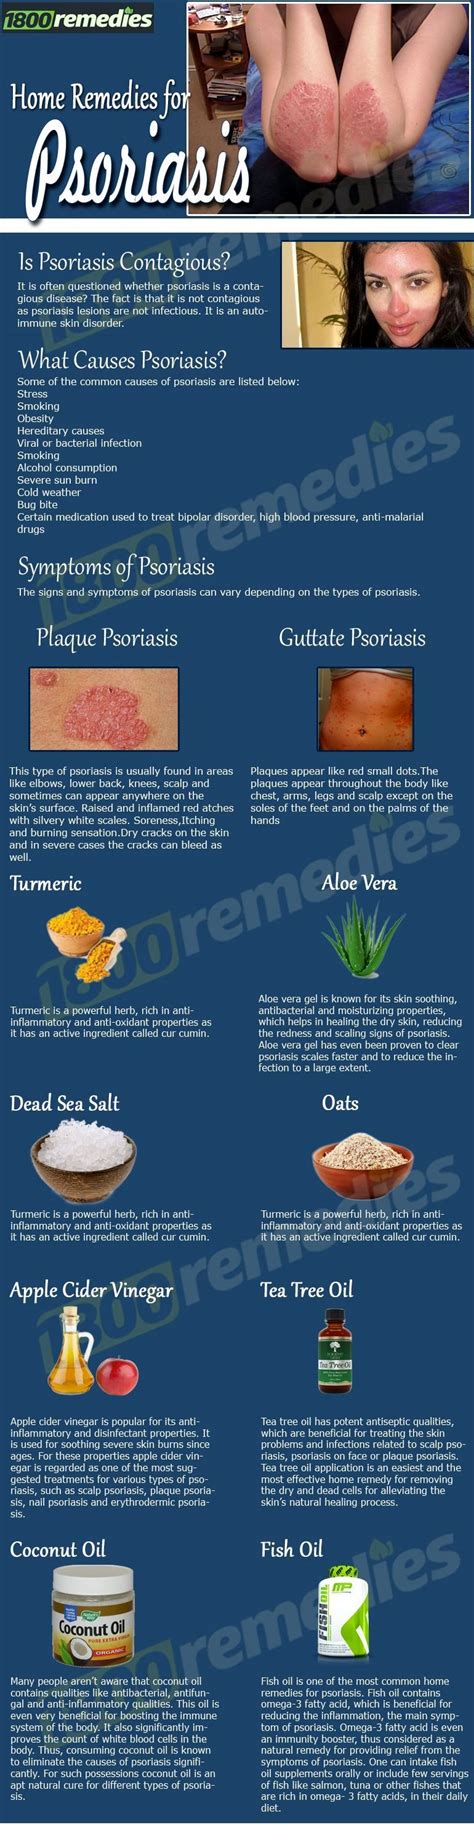 7 Helpful Home Remedies In 2020 Home Remedies For Psoriasis